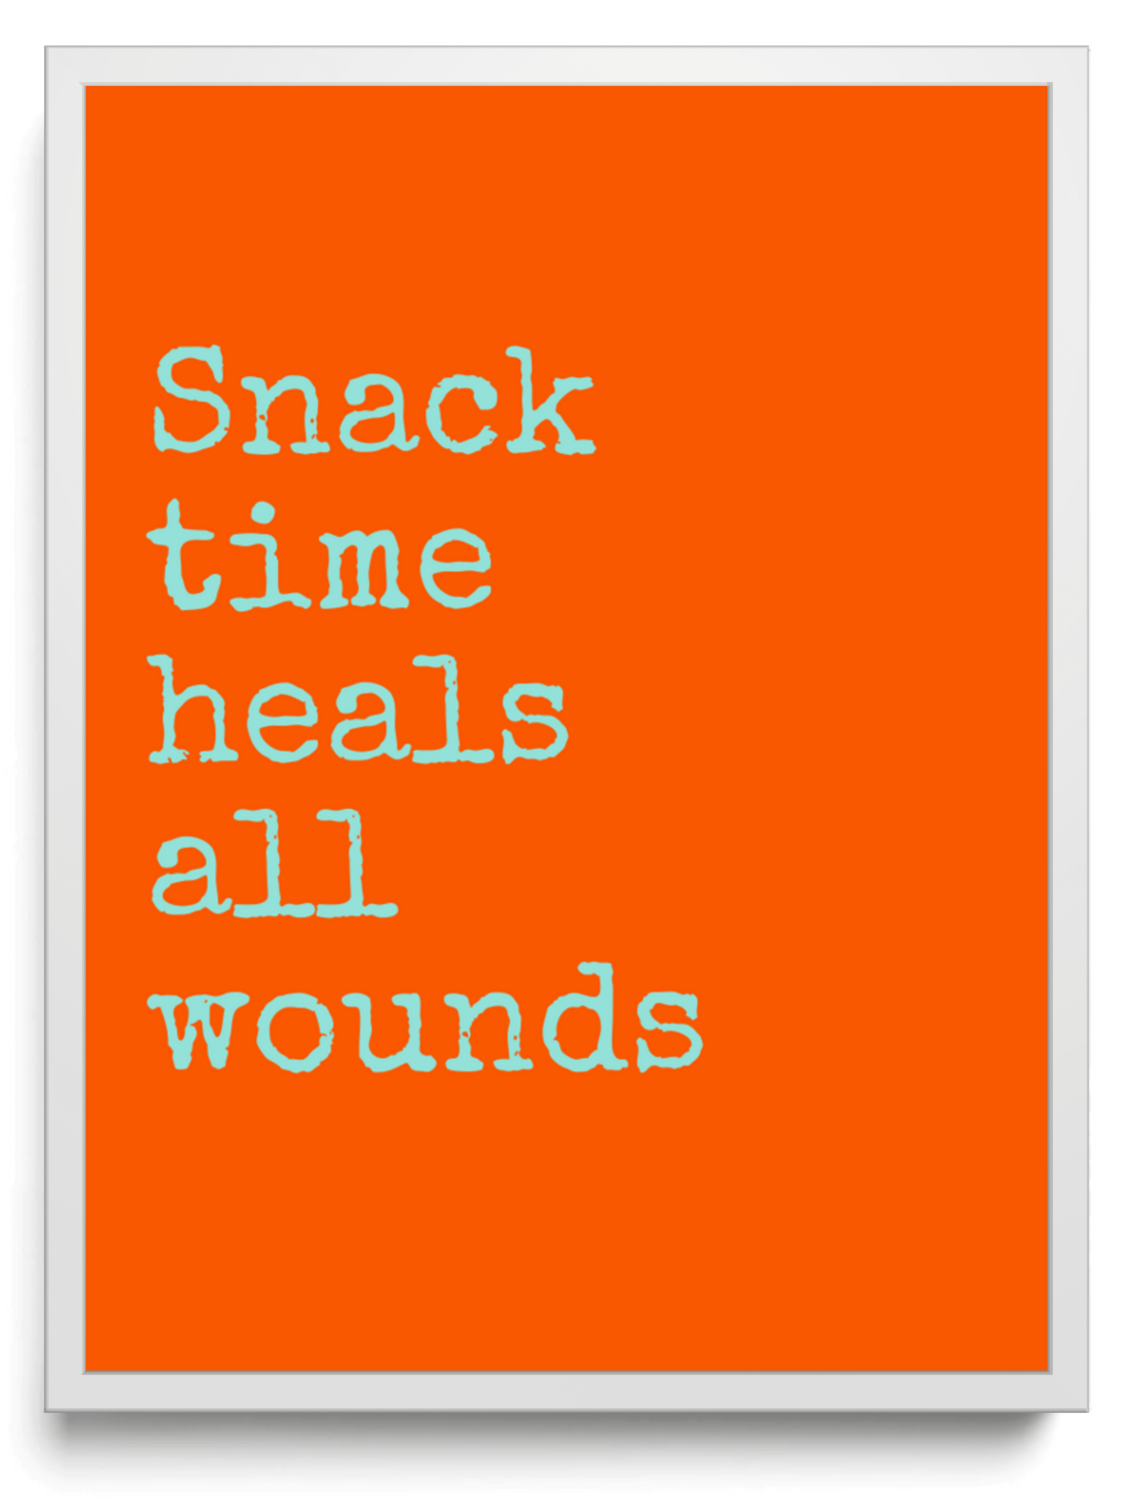 Snack time heals all wounds framed typographic print